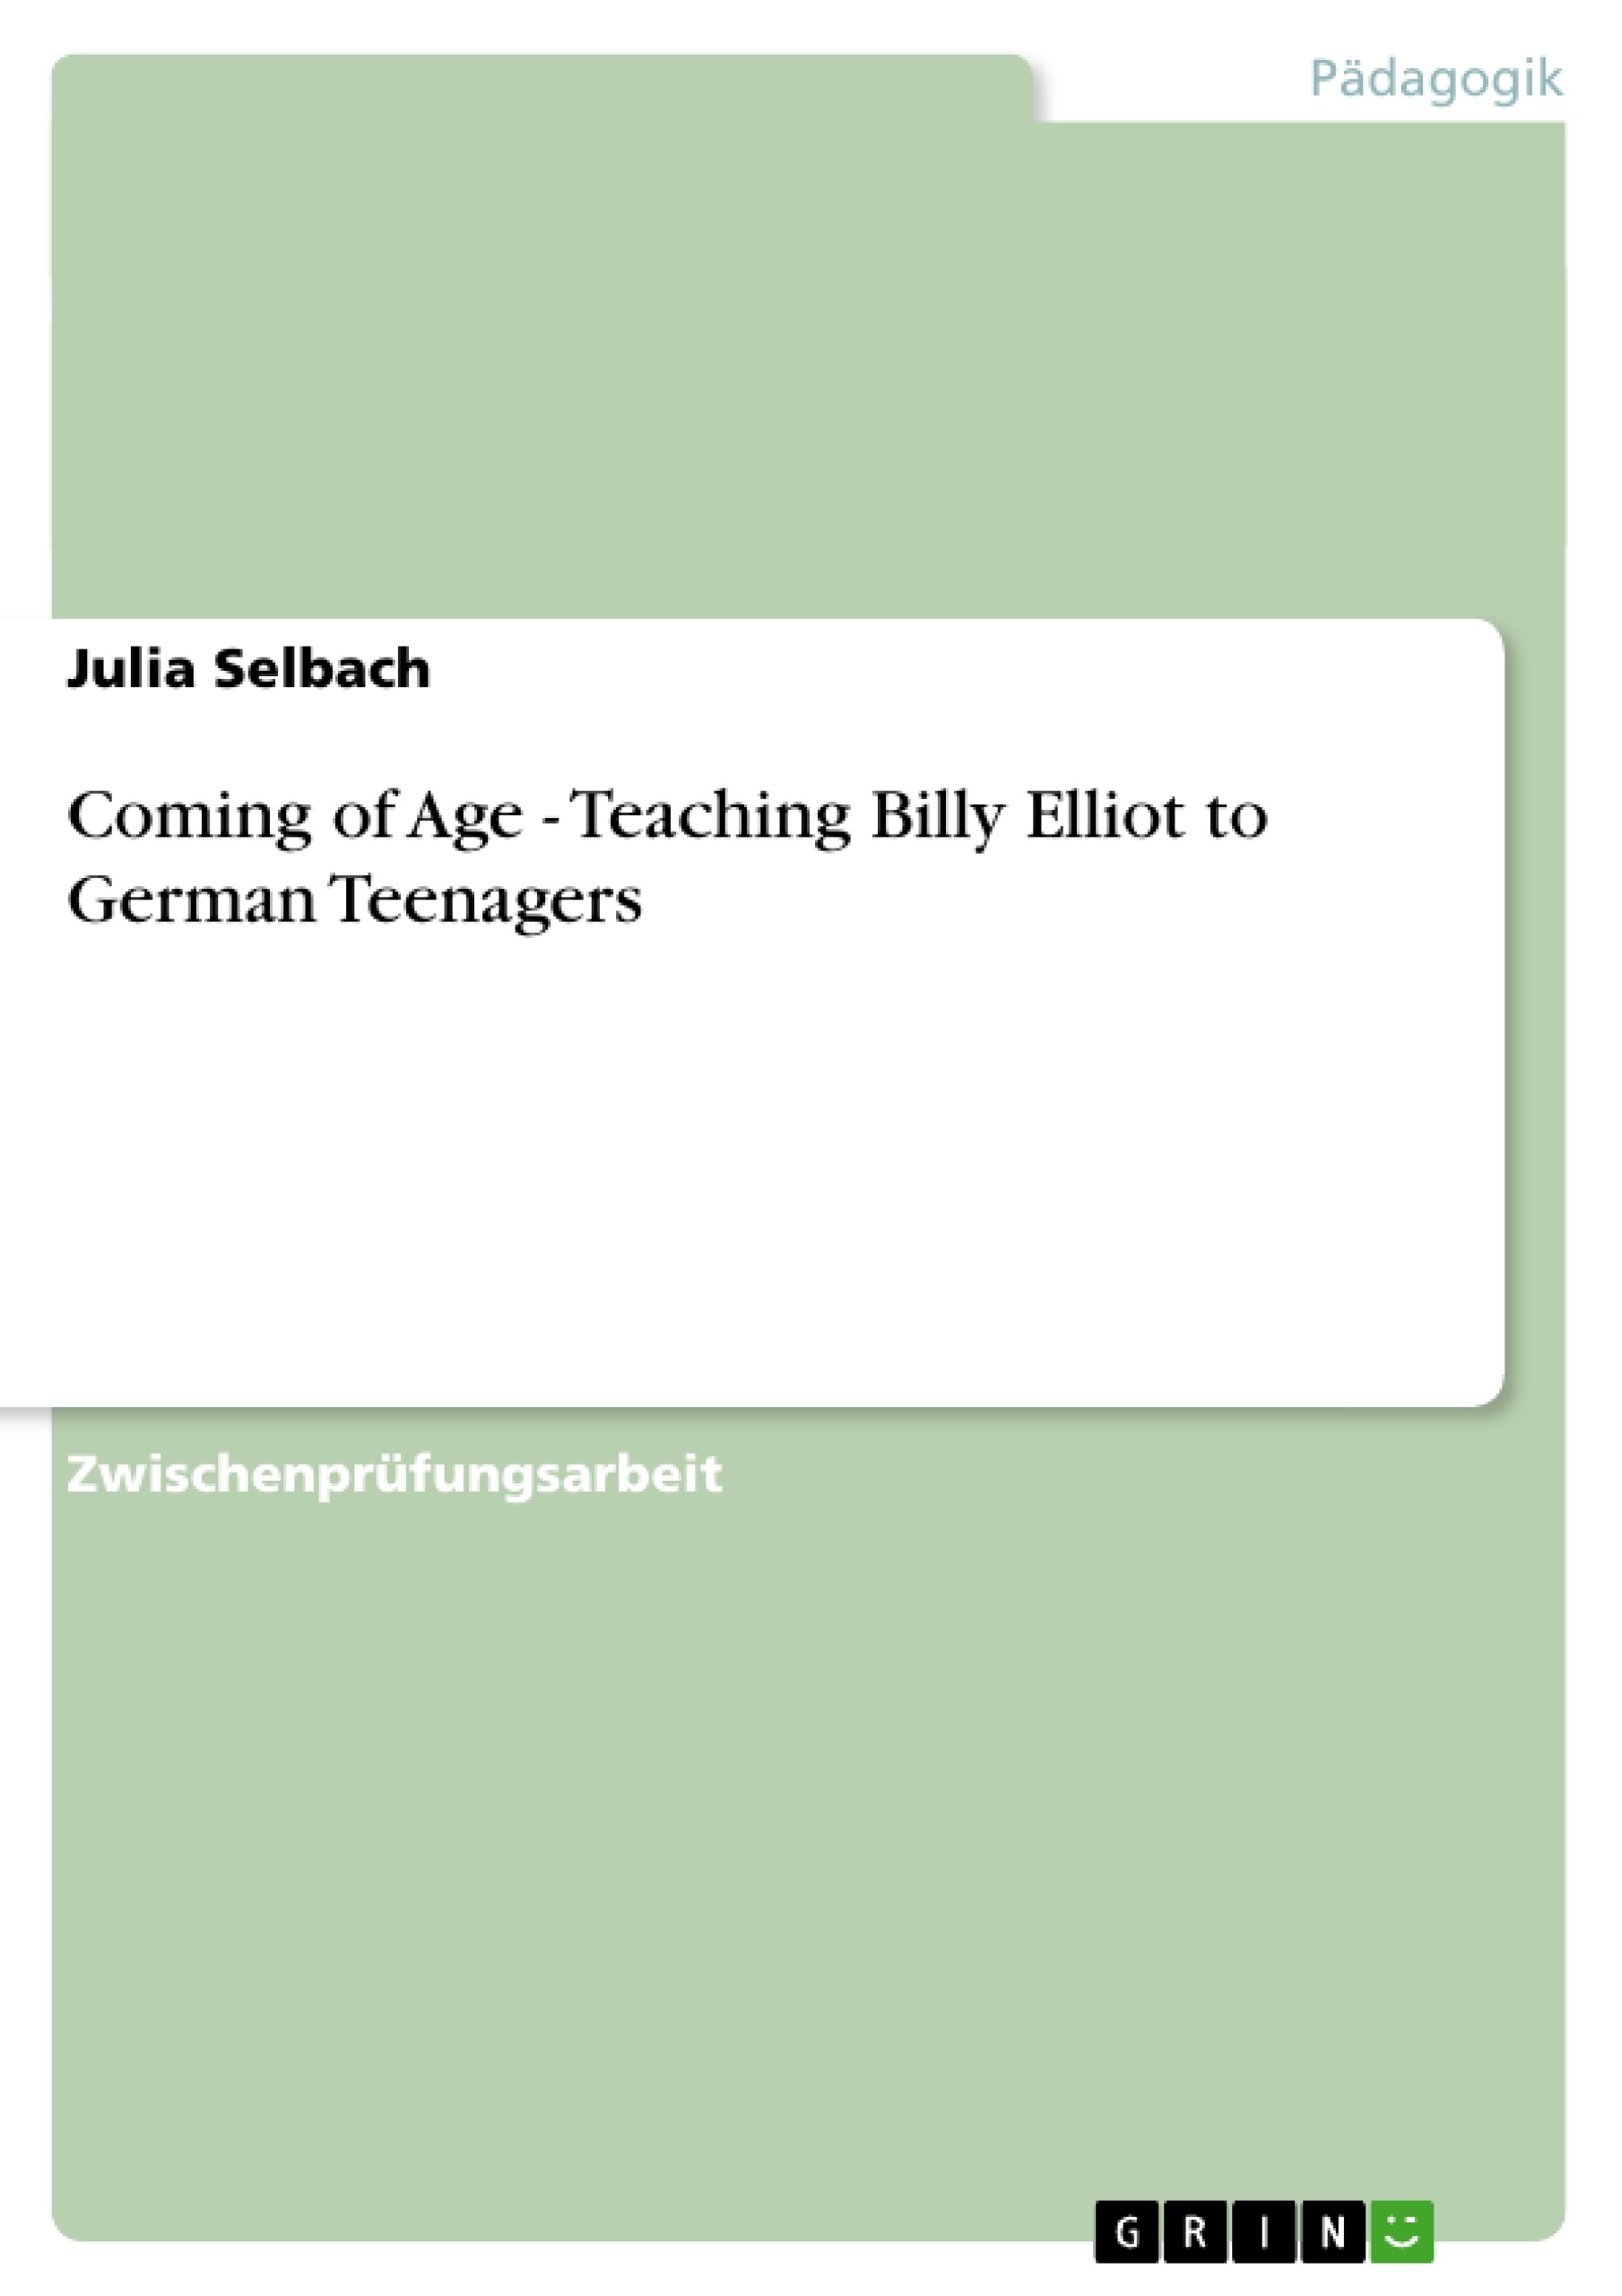 Title: Coming of Age - Teaching Billy Elliot to German Teenagers